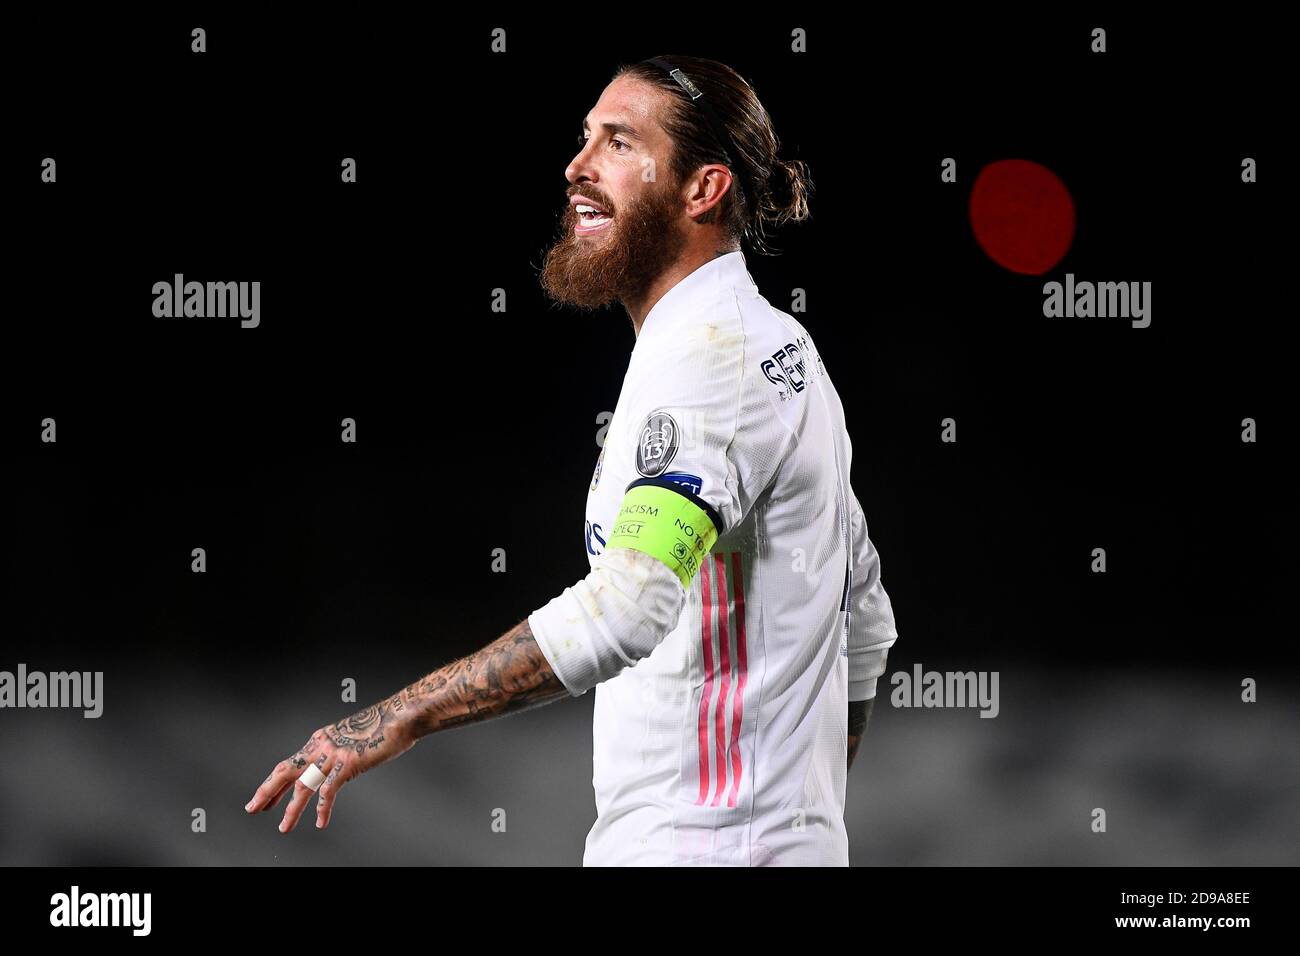 Madrid, Spain - 03 November, 2020: Sergio Ramos of Real Madrid CF looks on during the Champions League Group B football match between Real Madrid CF and FC Internazionale. Real Madrid CF won 3-2 over FC Internazionale. Credit: Nicolò Campo/Alamy Live News Stock Photo